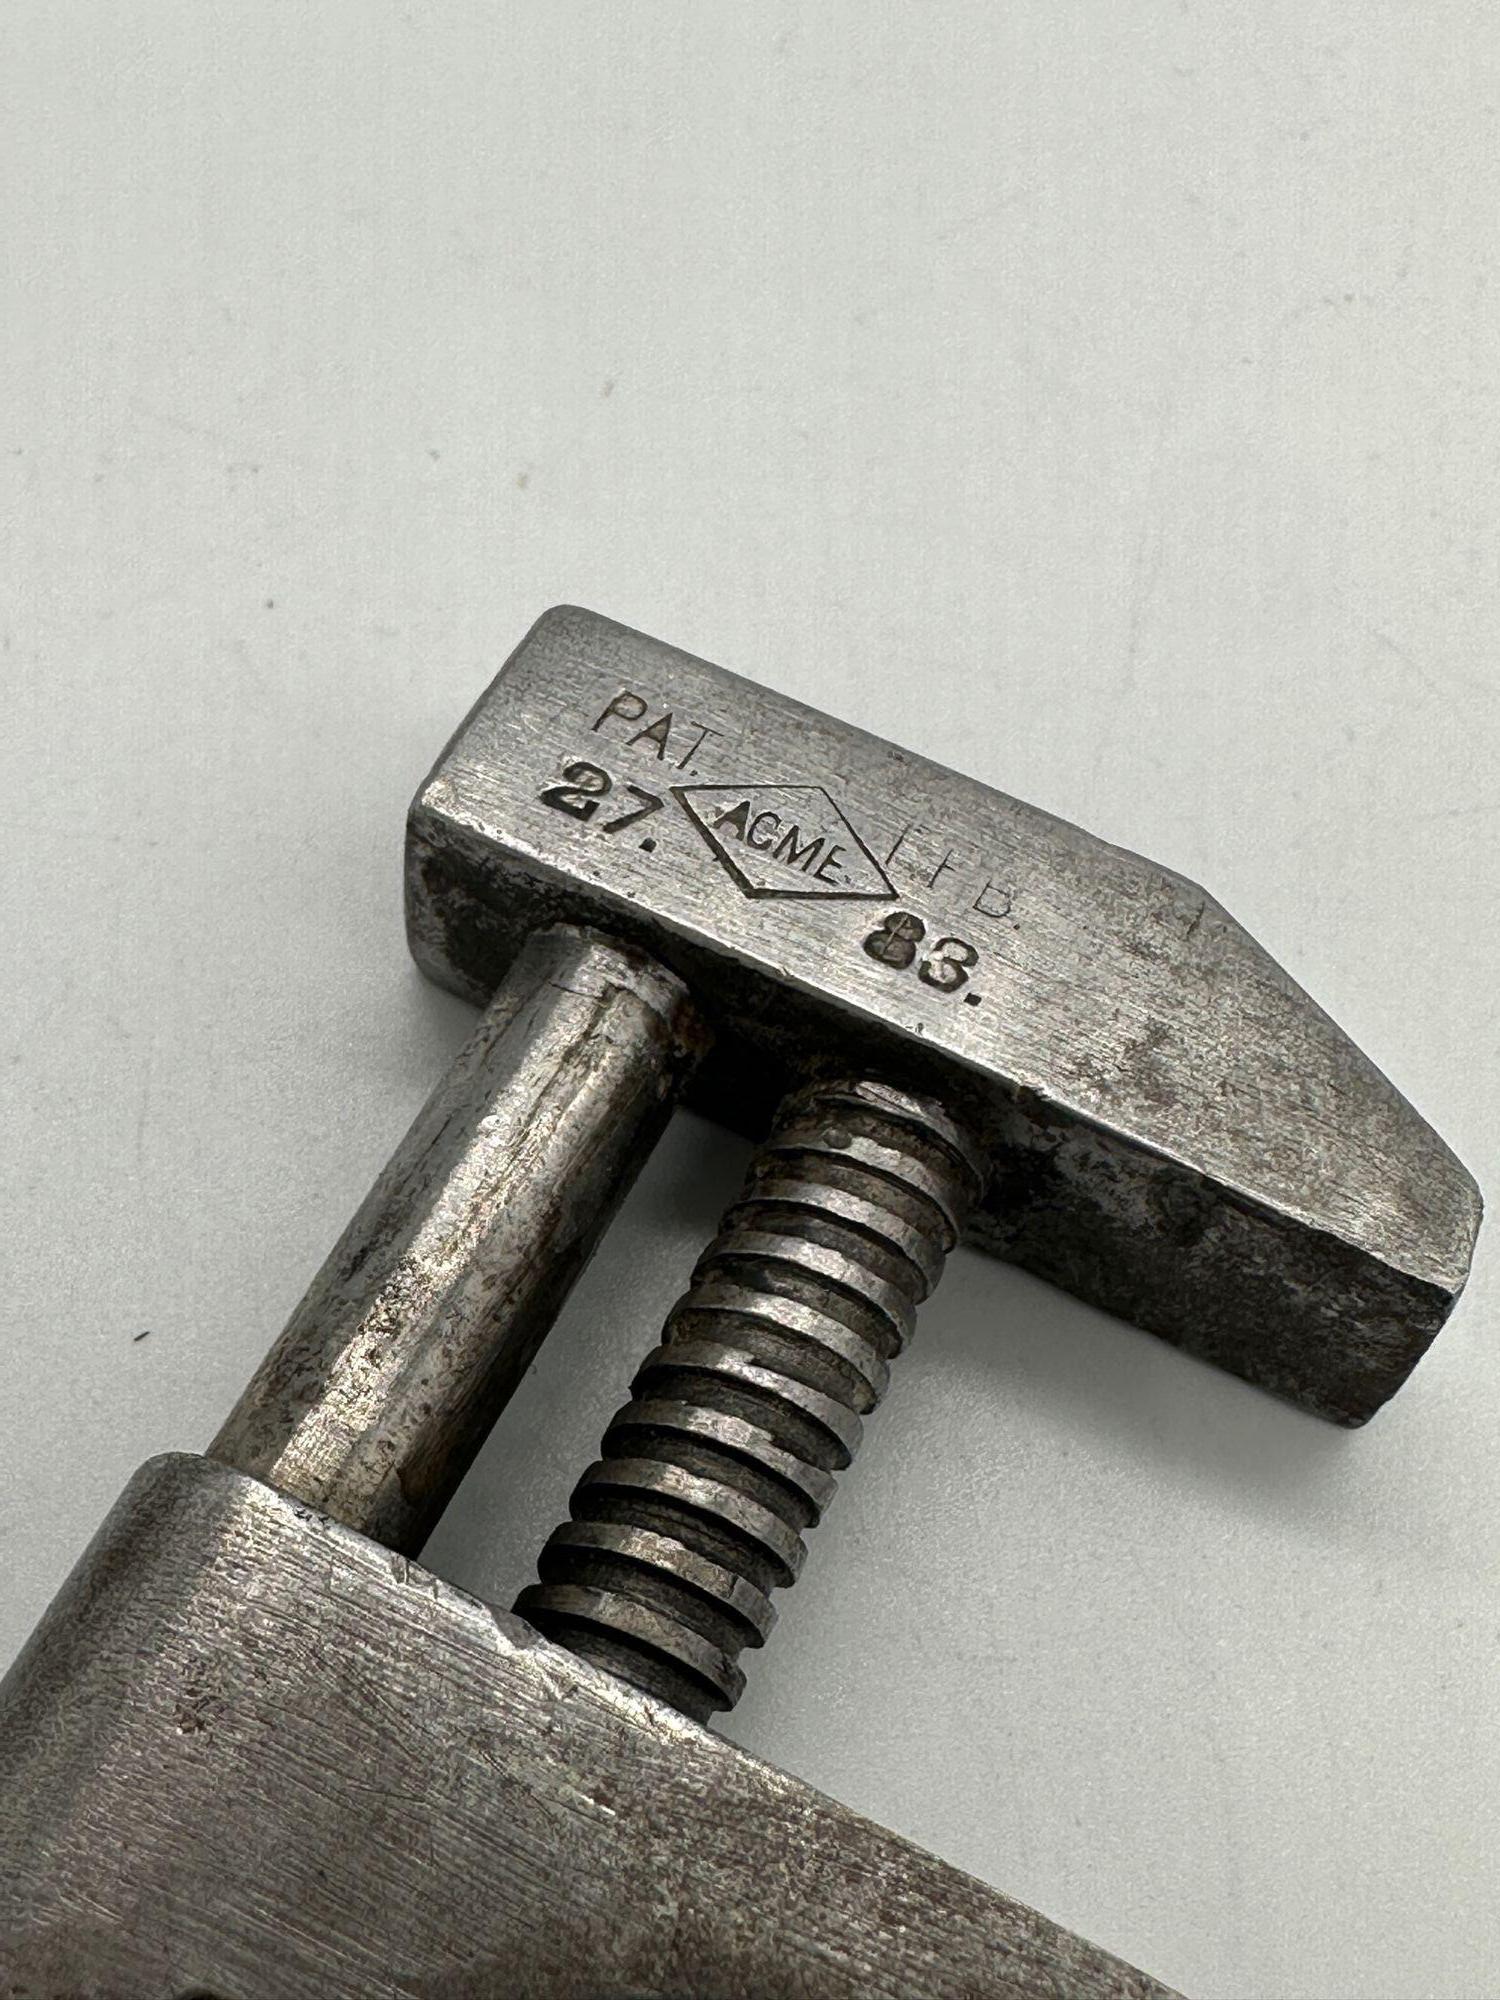 Antique Acme 5-inch Forged Adjustable Spanner Wrench featuring a Twisted Handle, patented by Frederick Seymour under Patent number 27.83.

The handle is constructed from a wire or rod bent to create two parallel rods. One of these rods is threaded